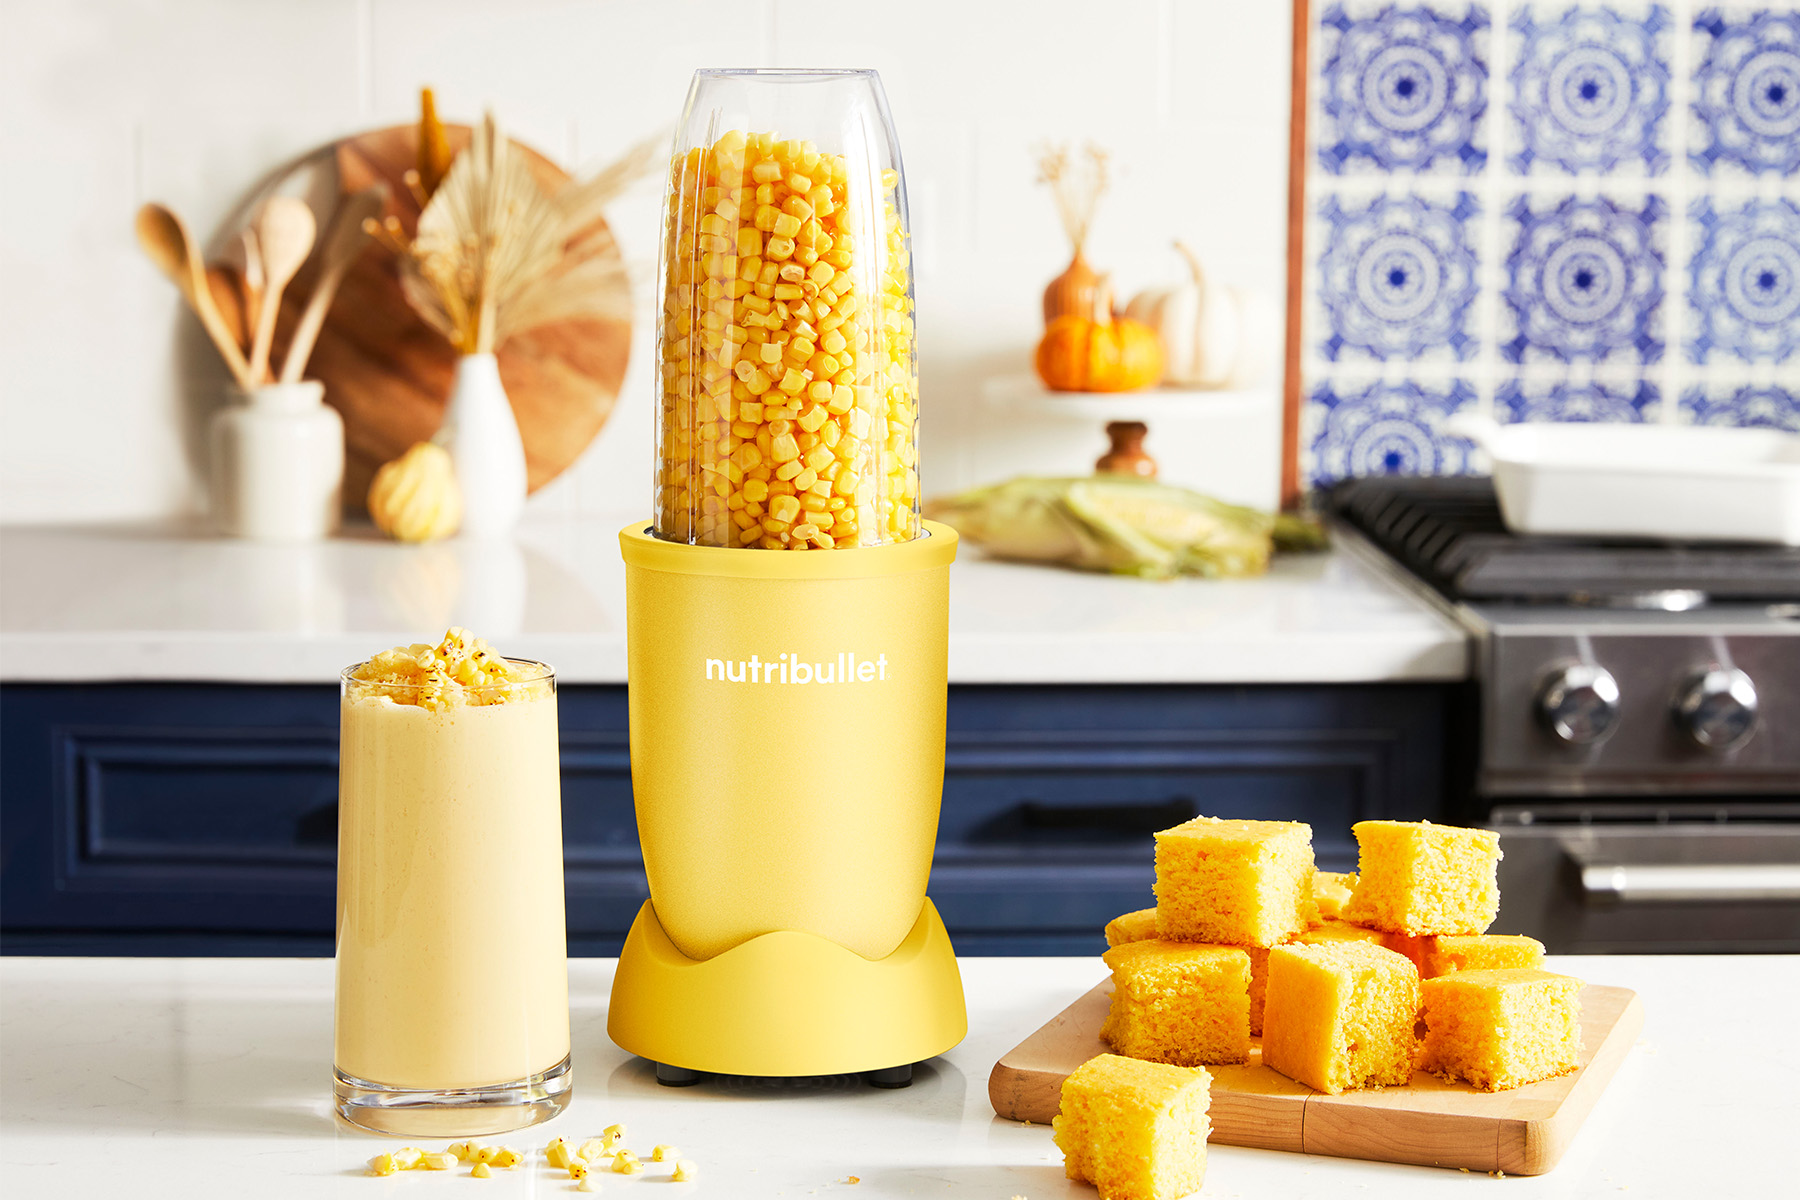 cup of blended corn next to a yellow nutribullet blender along with a plate of cornbread on a kitchen counter